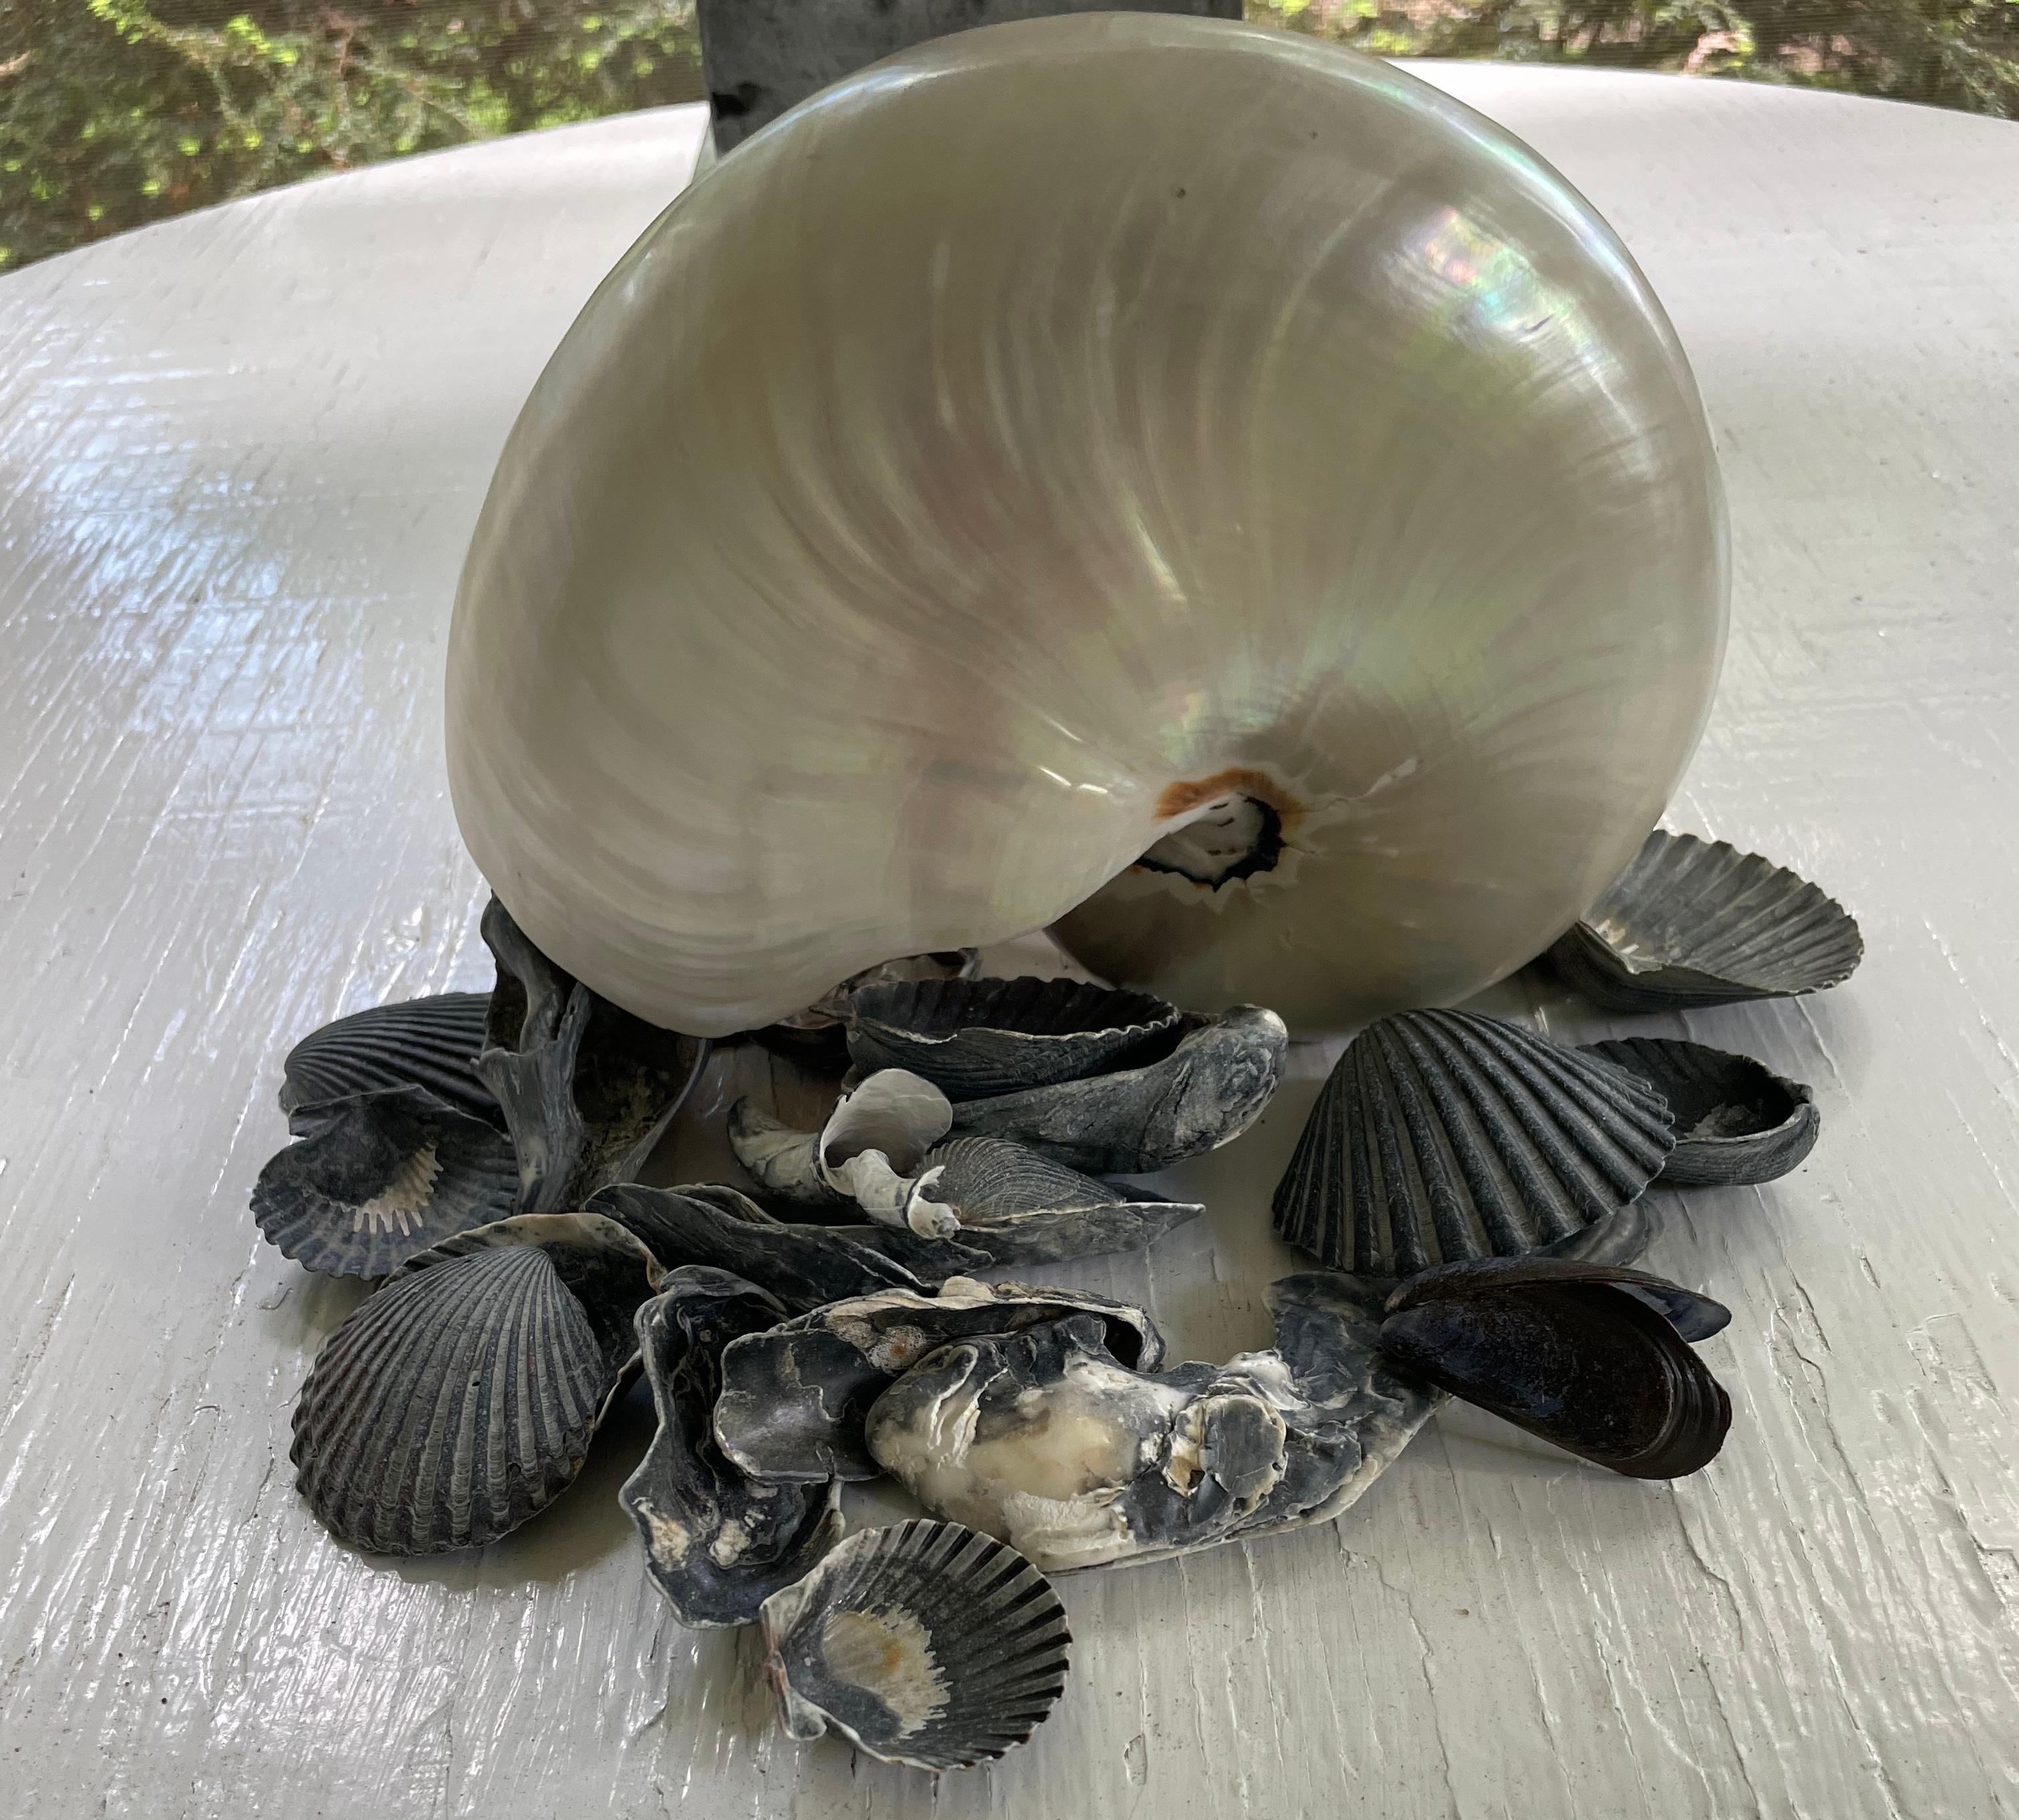 Vintage mother of pearl nautilus shell. Beautiful large scale natural nautilus shell, perfect for beach house décor and nautical table scapes. Asia, Mid-20th Century.
Dimensions: 7.5